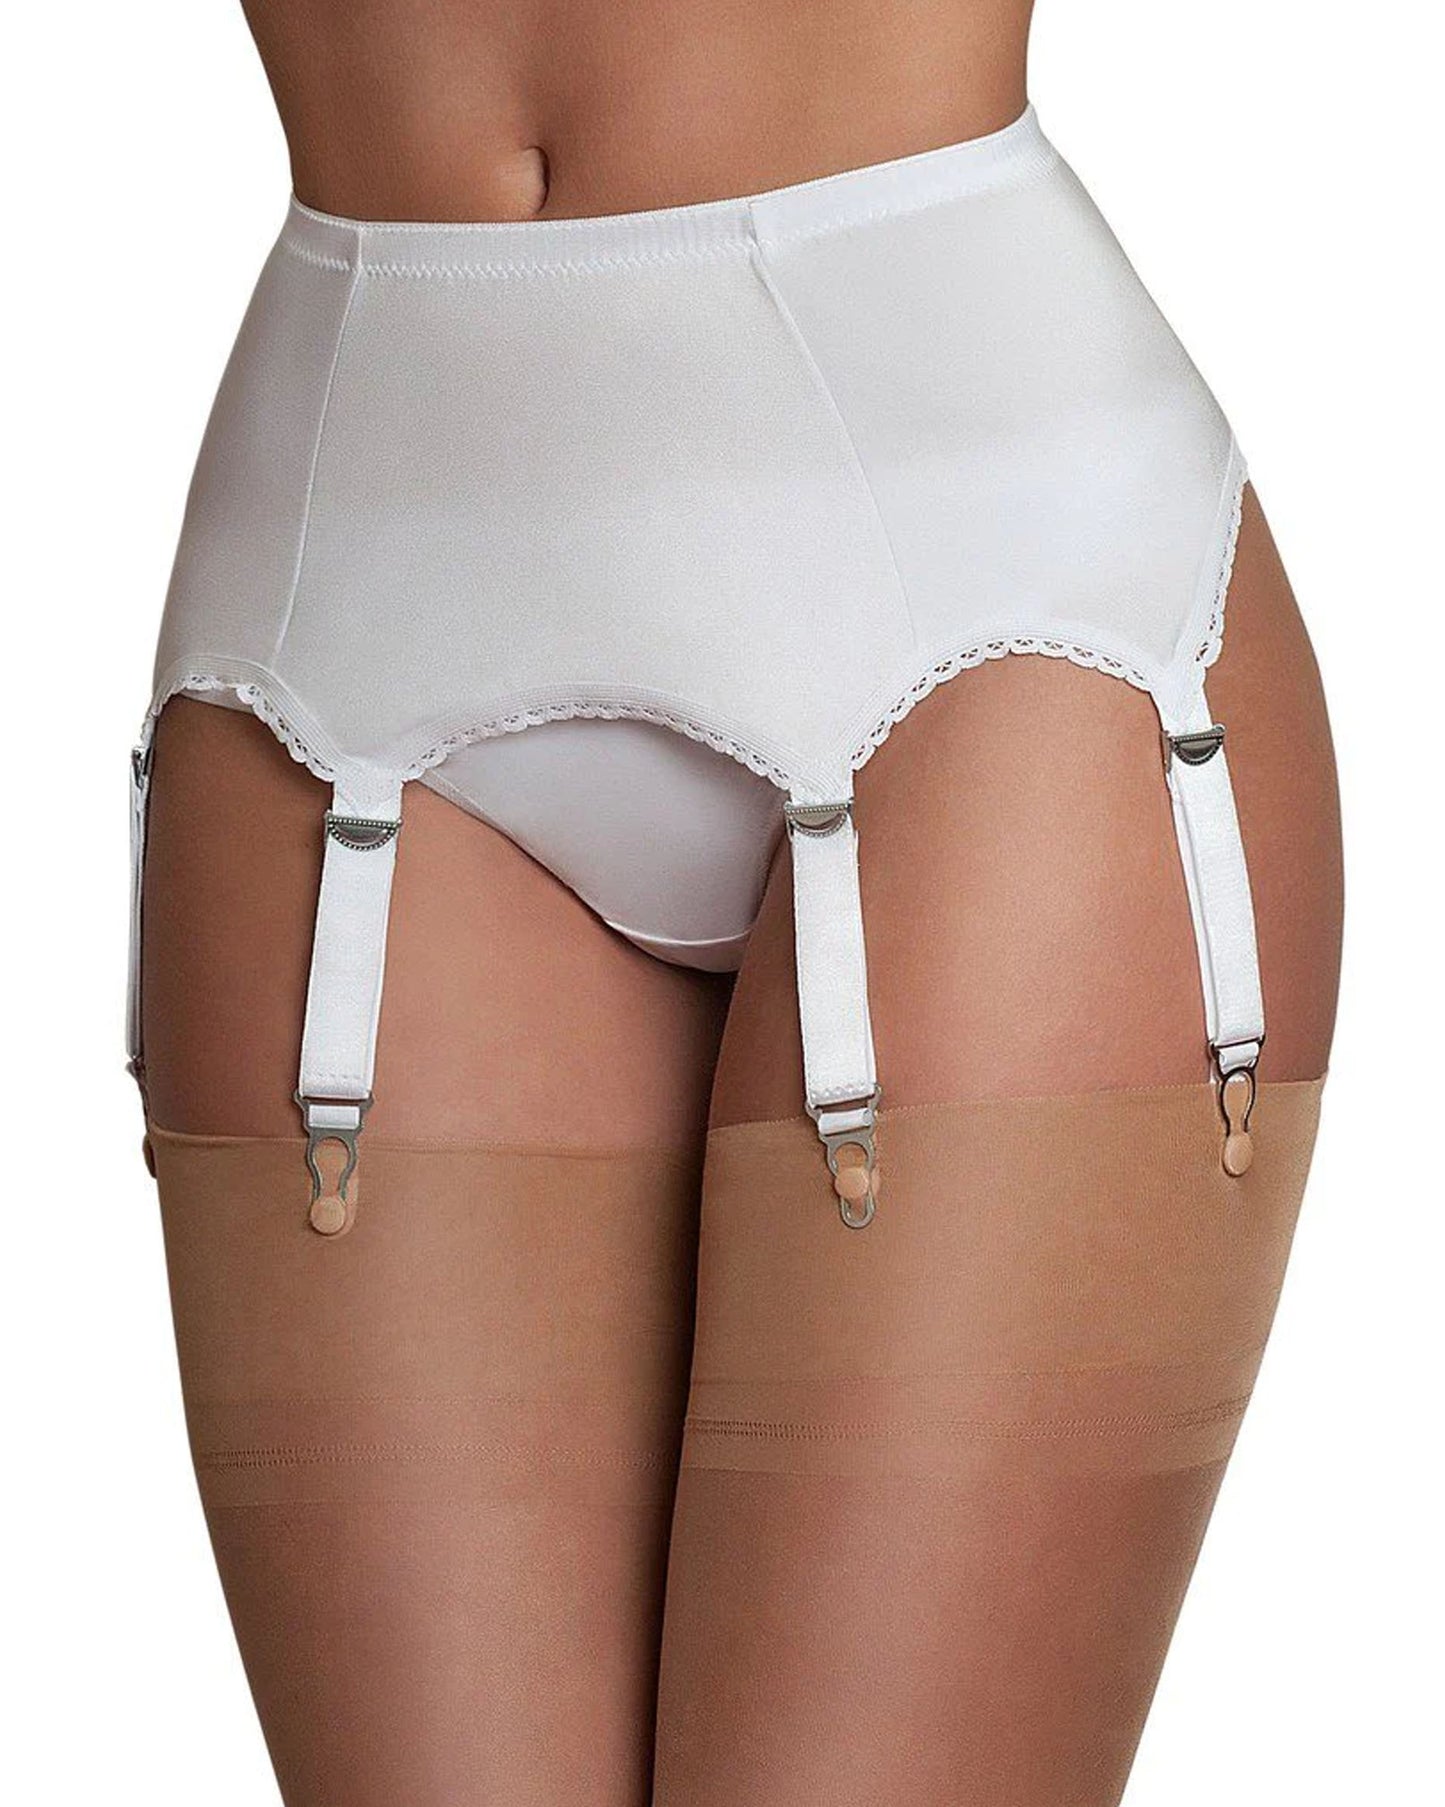 White classic high waisted lycra suspender belt with thick straps and metal clasps.